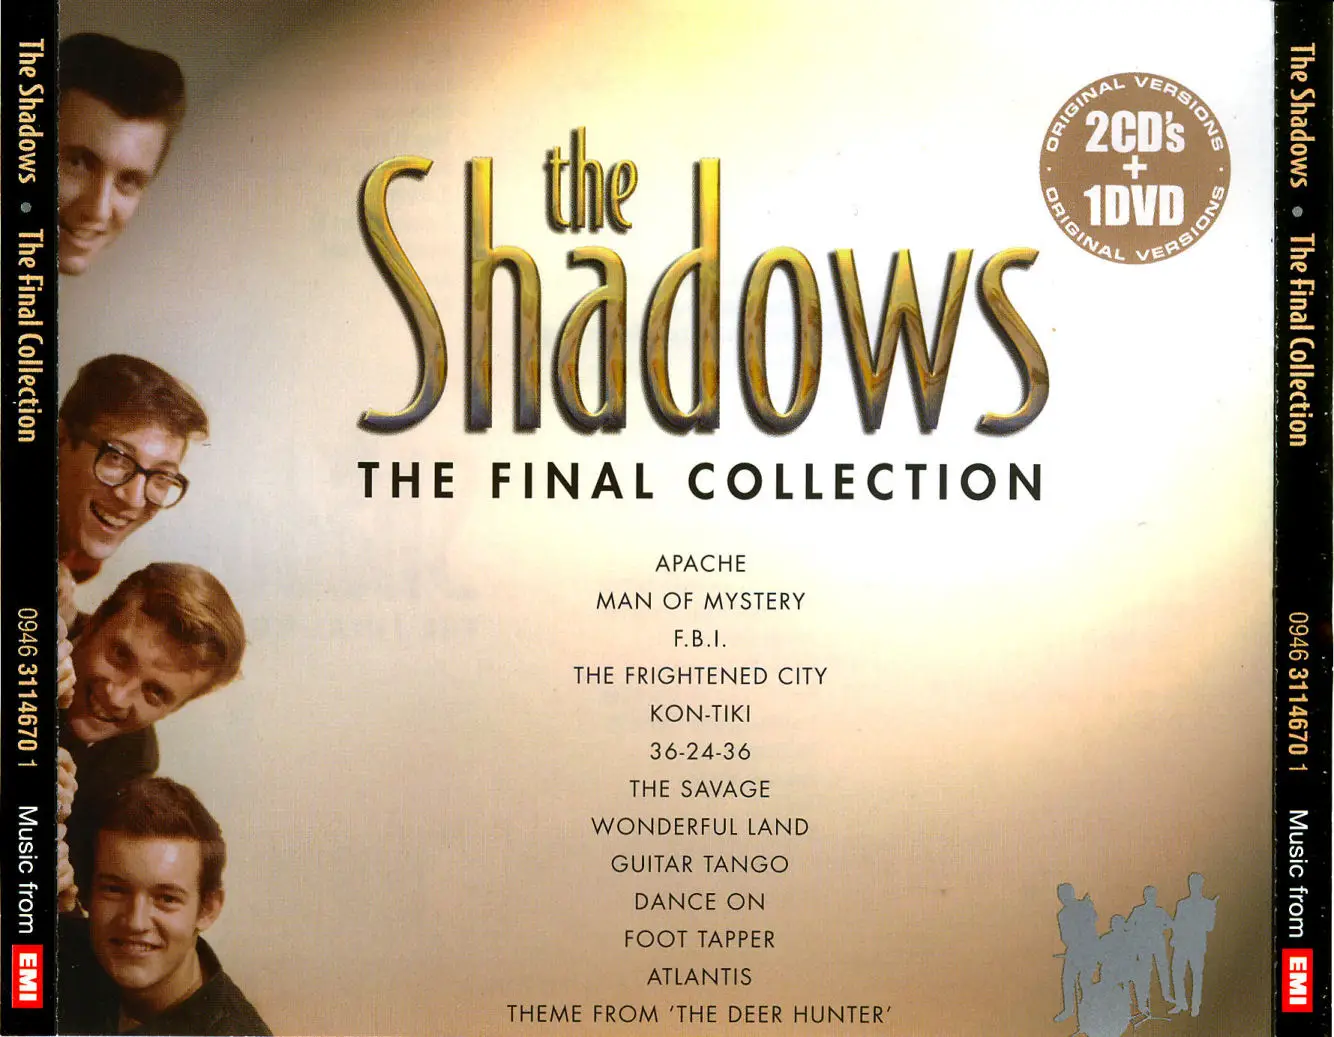 The Shadows Platinum collection. The Shadows-альбомы. CD Platinum collection. CD альбомы 2005. Collection 2005